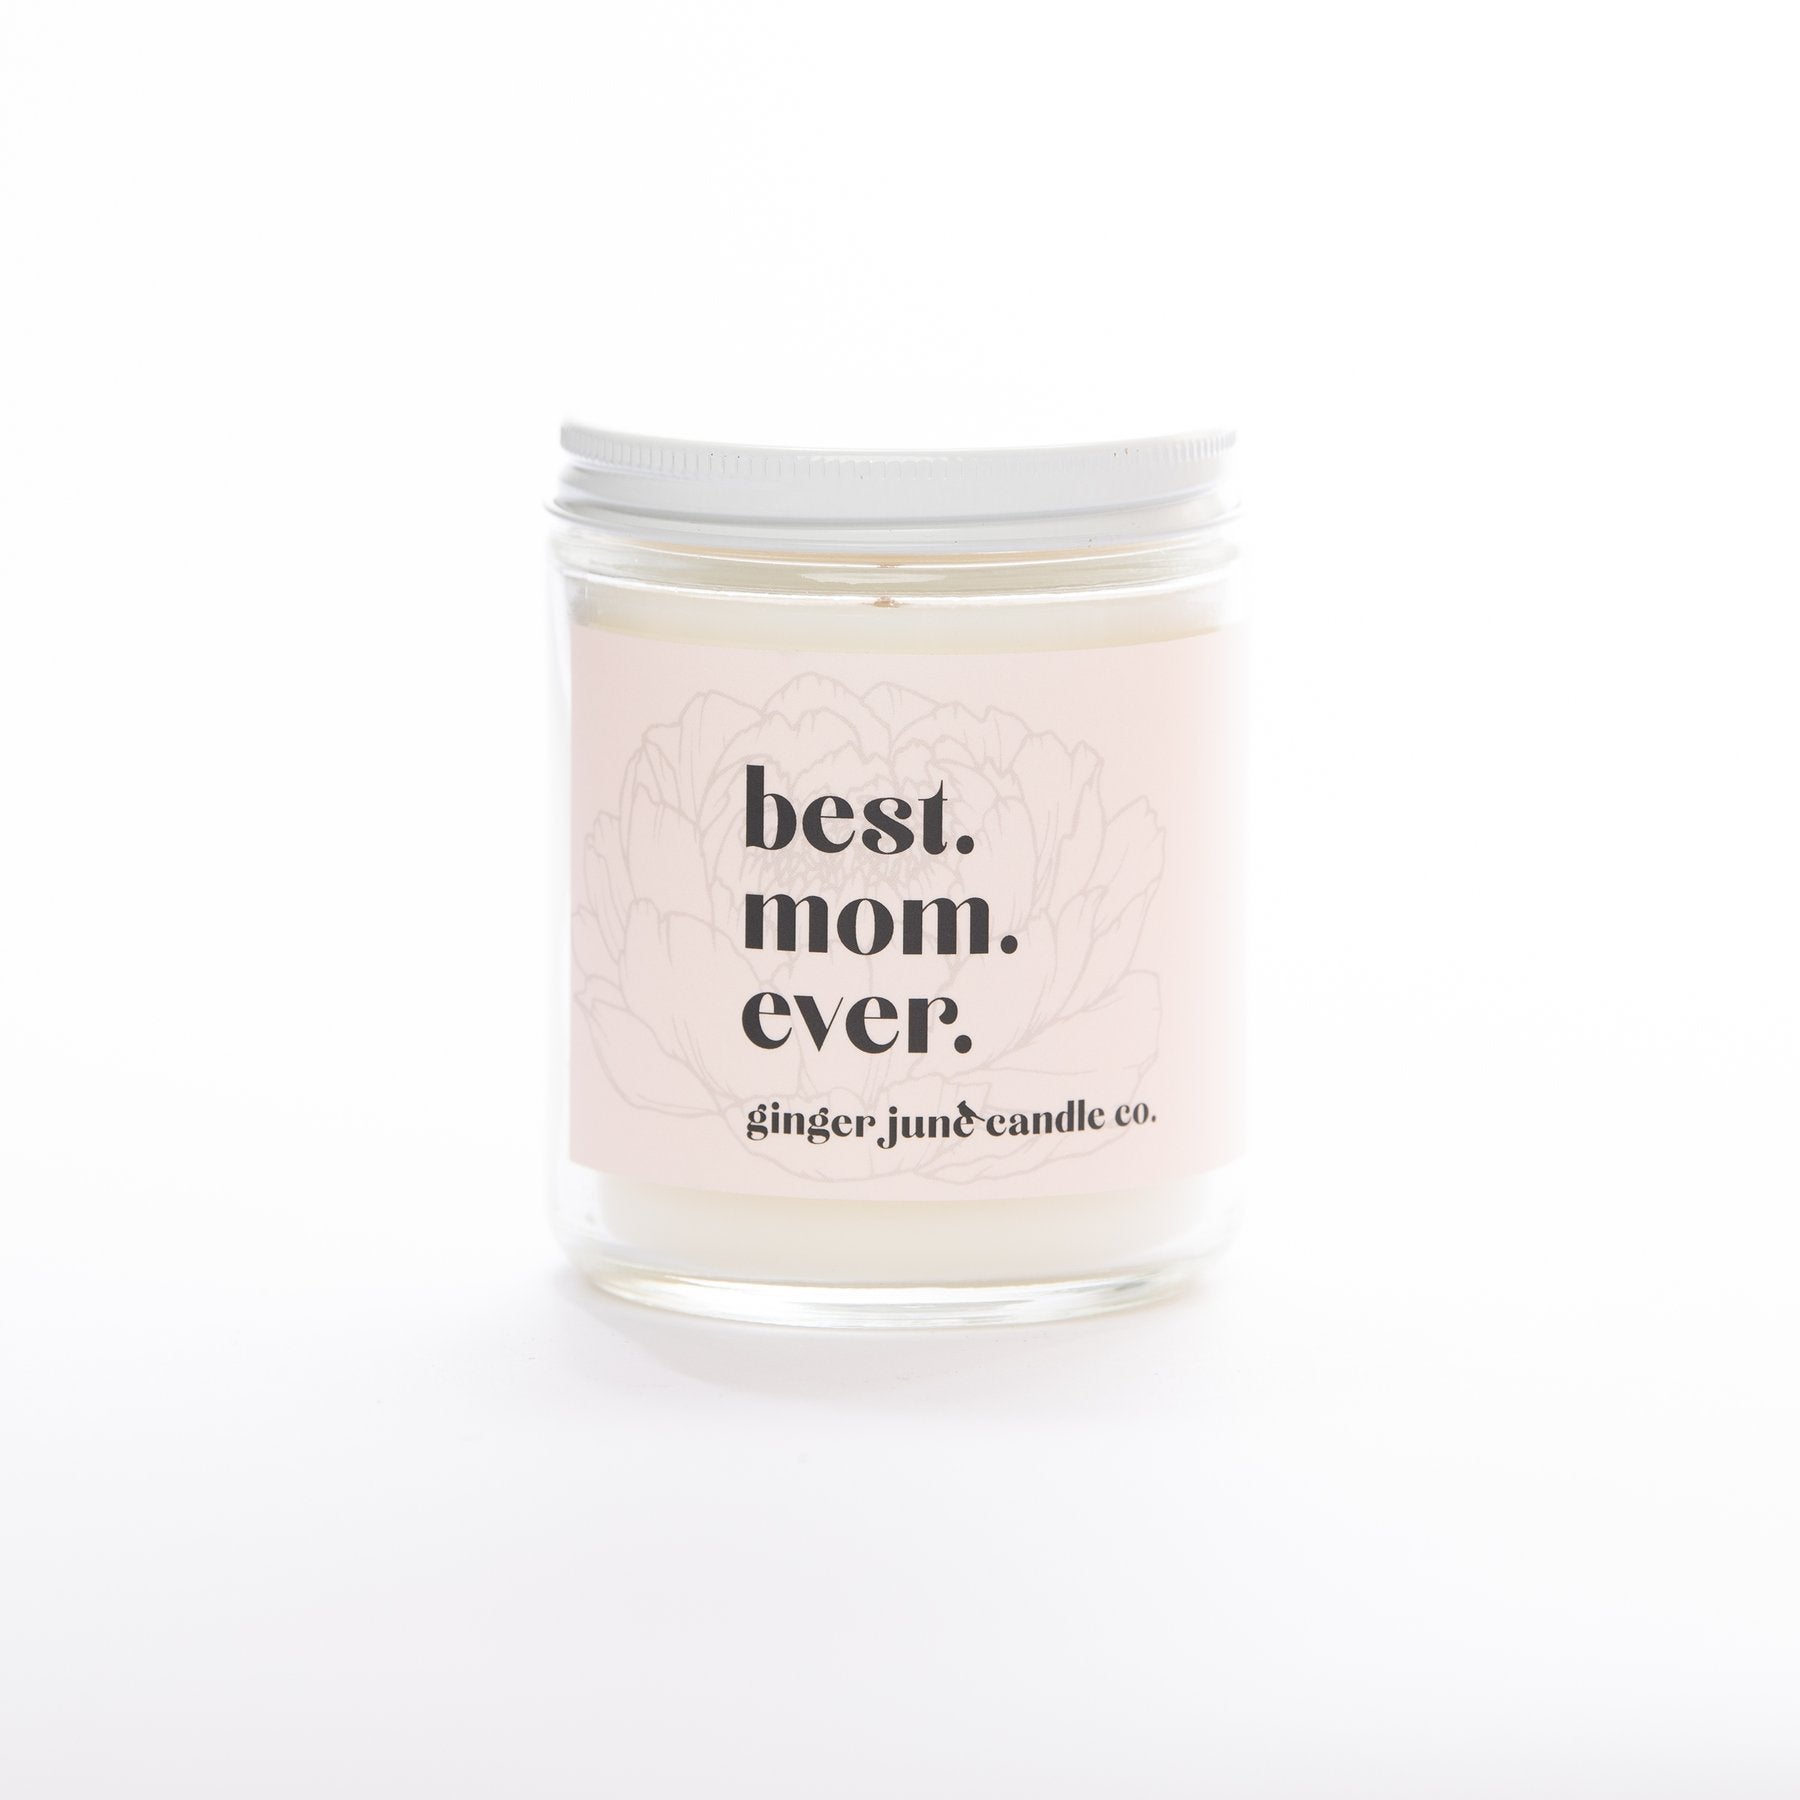 Best. Mom. Ever. by Ginger June Candle Co.